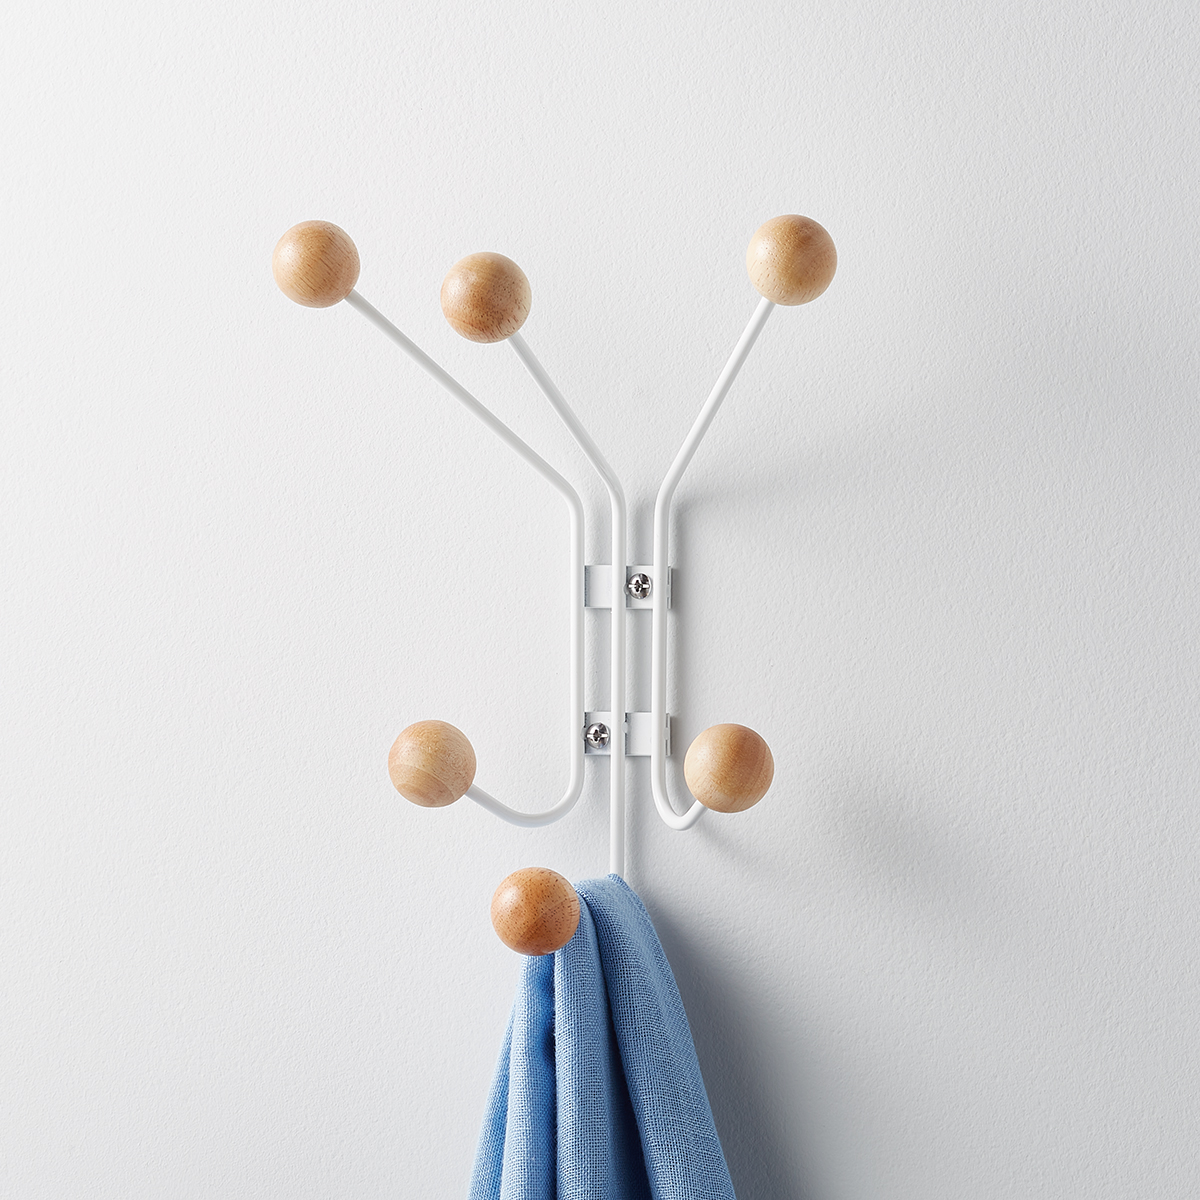 https://www.containerstore.com/catalogimages/433543/10085437_Orbit_6_Hook_Wall-Mounted_H.jpg